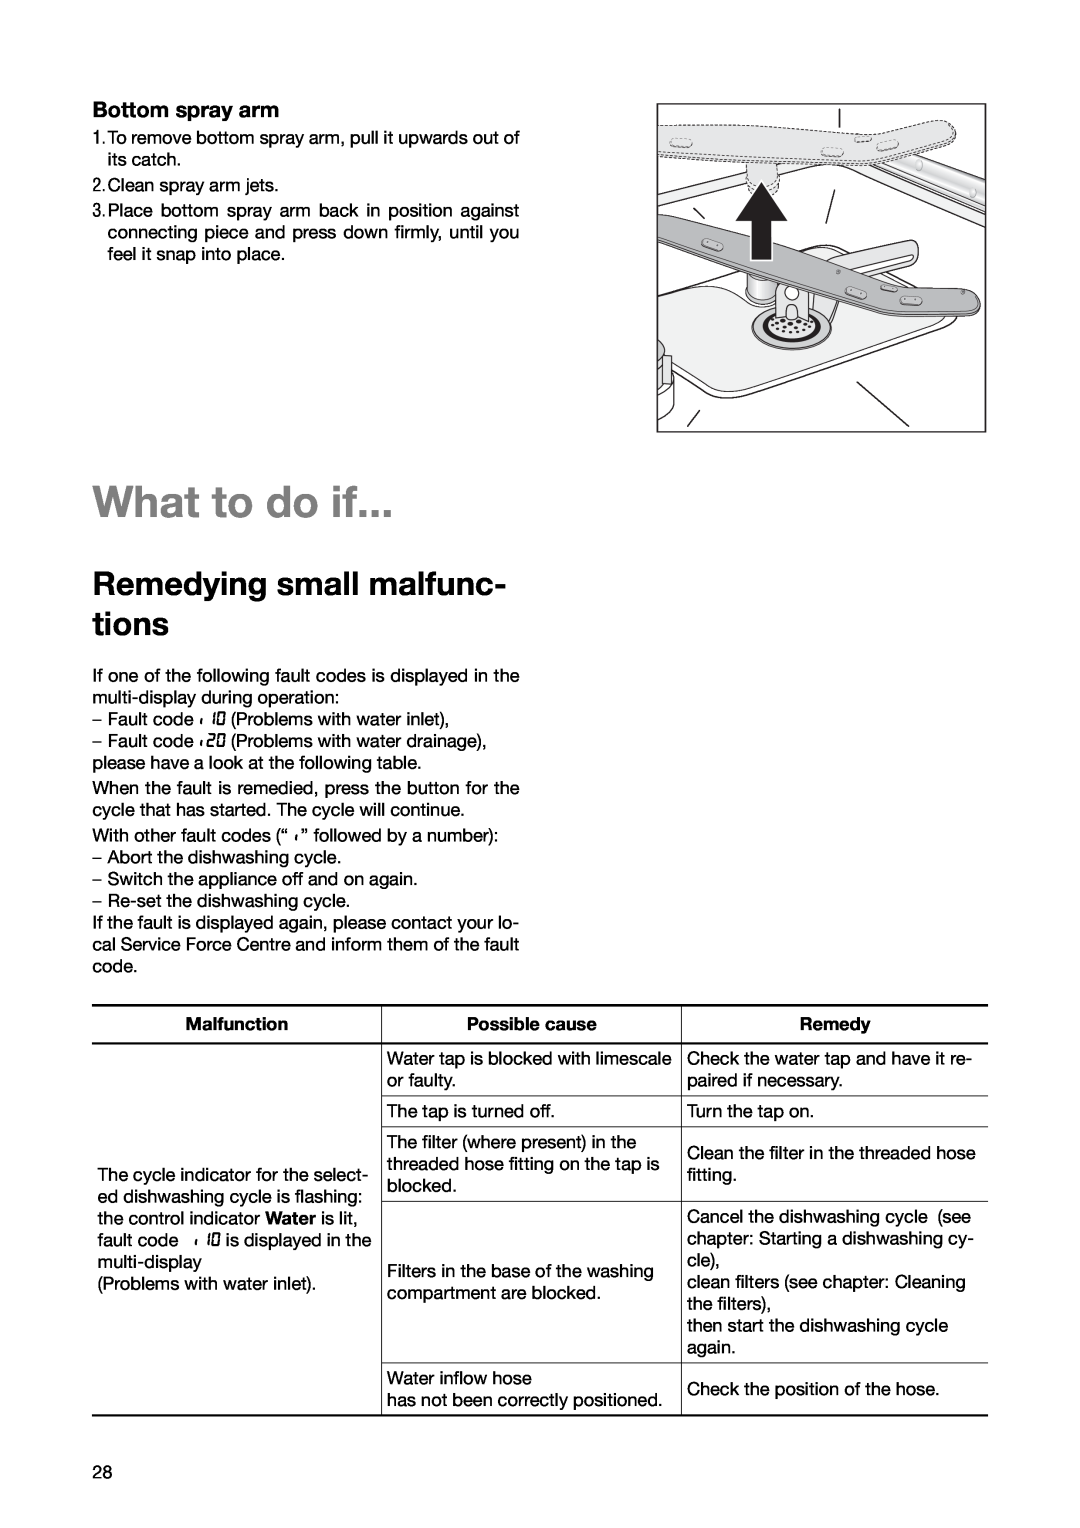 Zanussi ZSF 6171 manual What to do if, Remedying small malfunc- tions, Bottom spray arm 